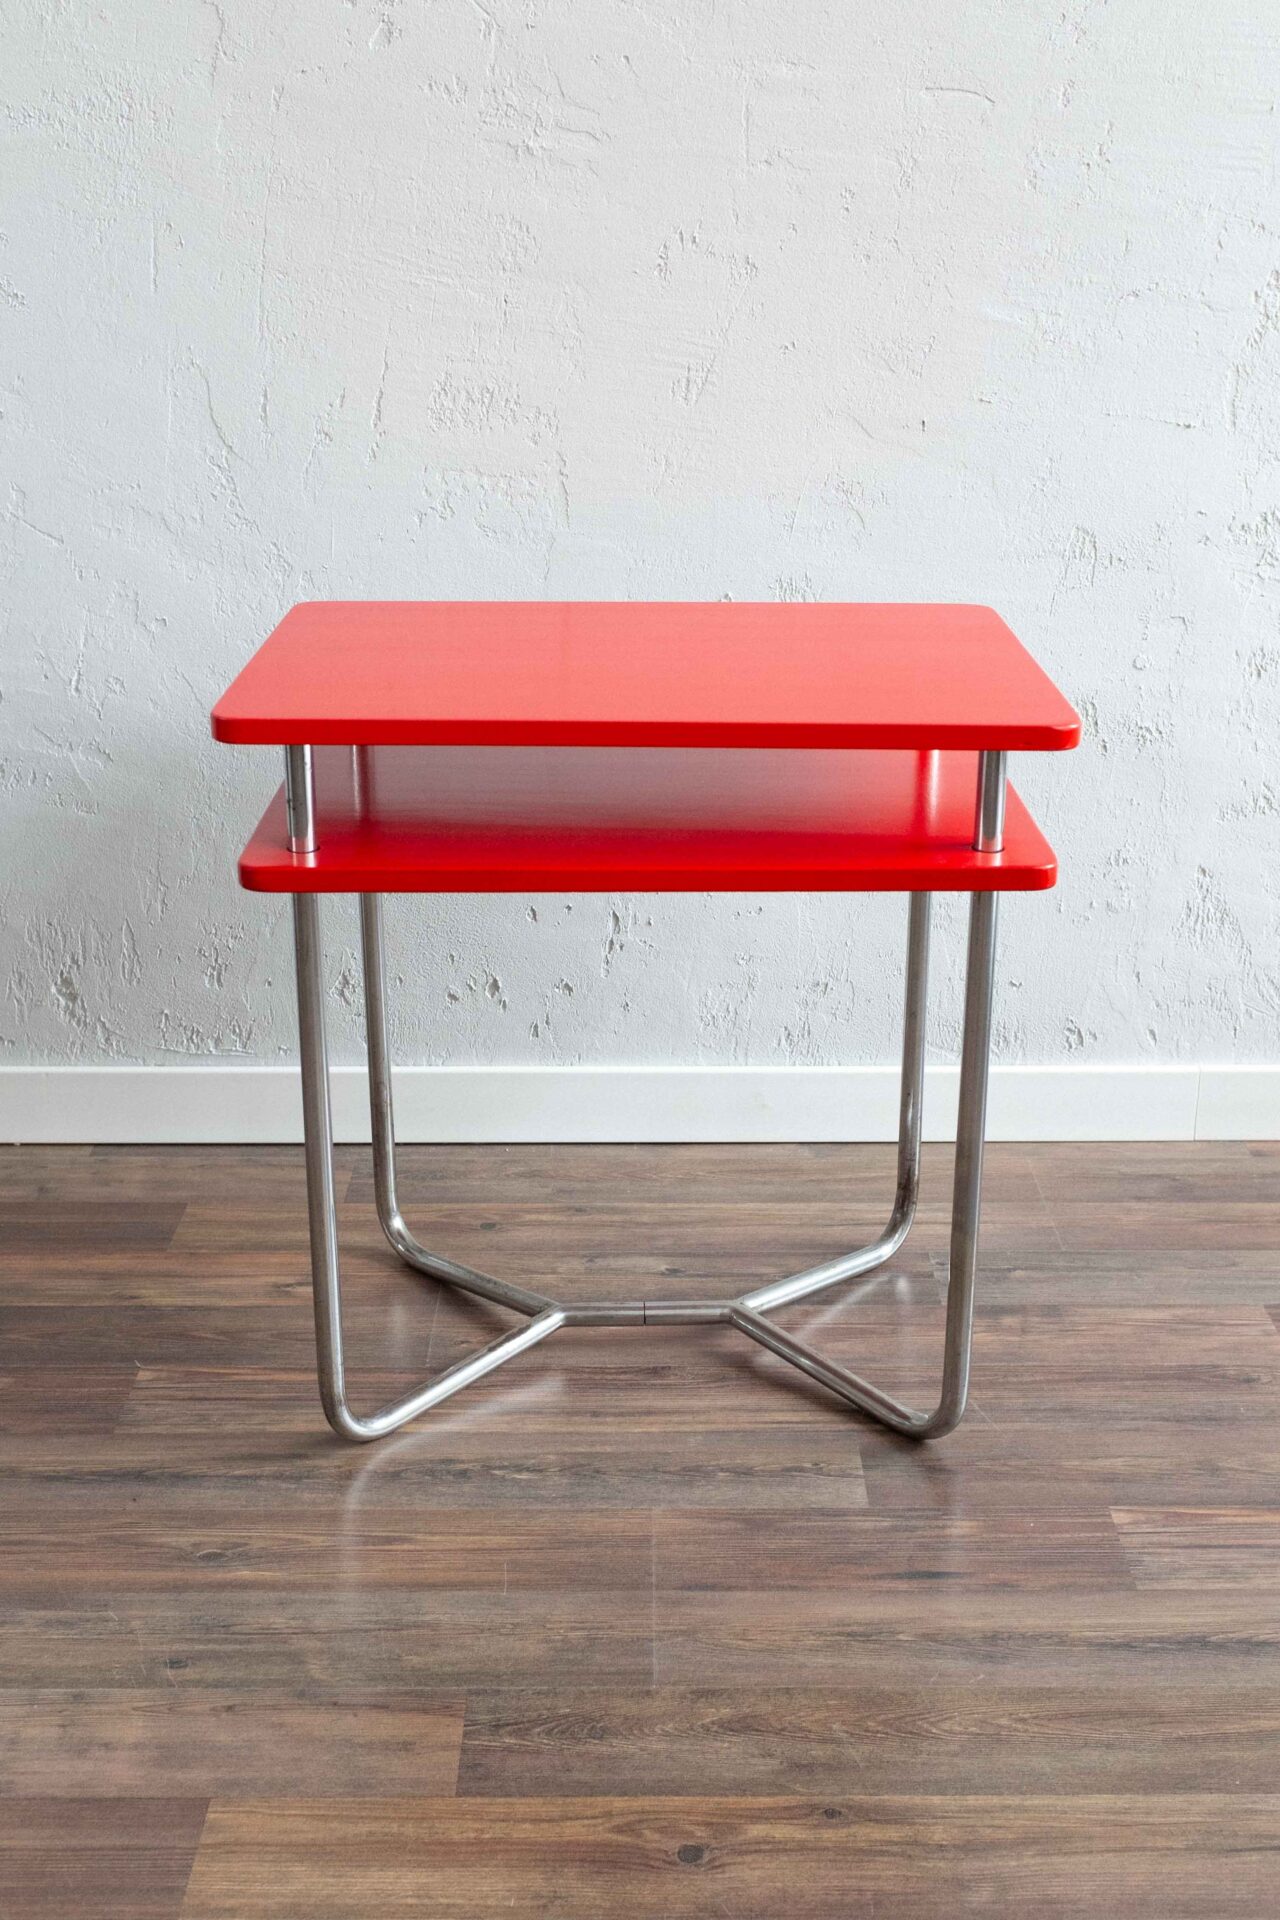 Functionalist Red Chrome Table